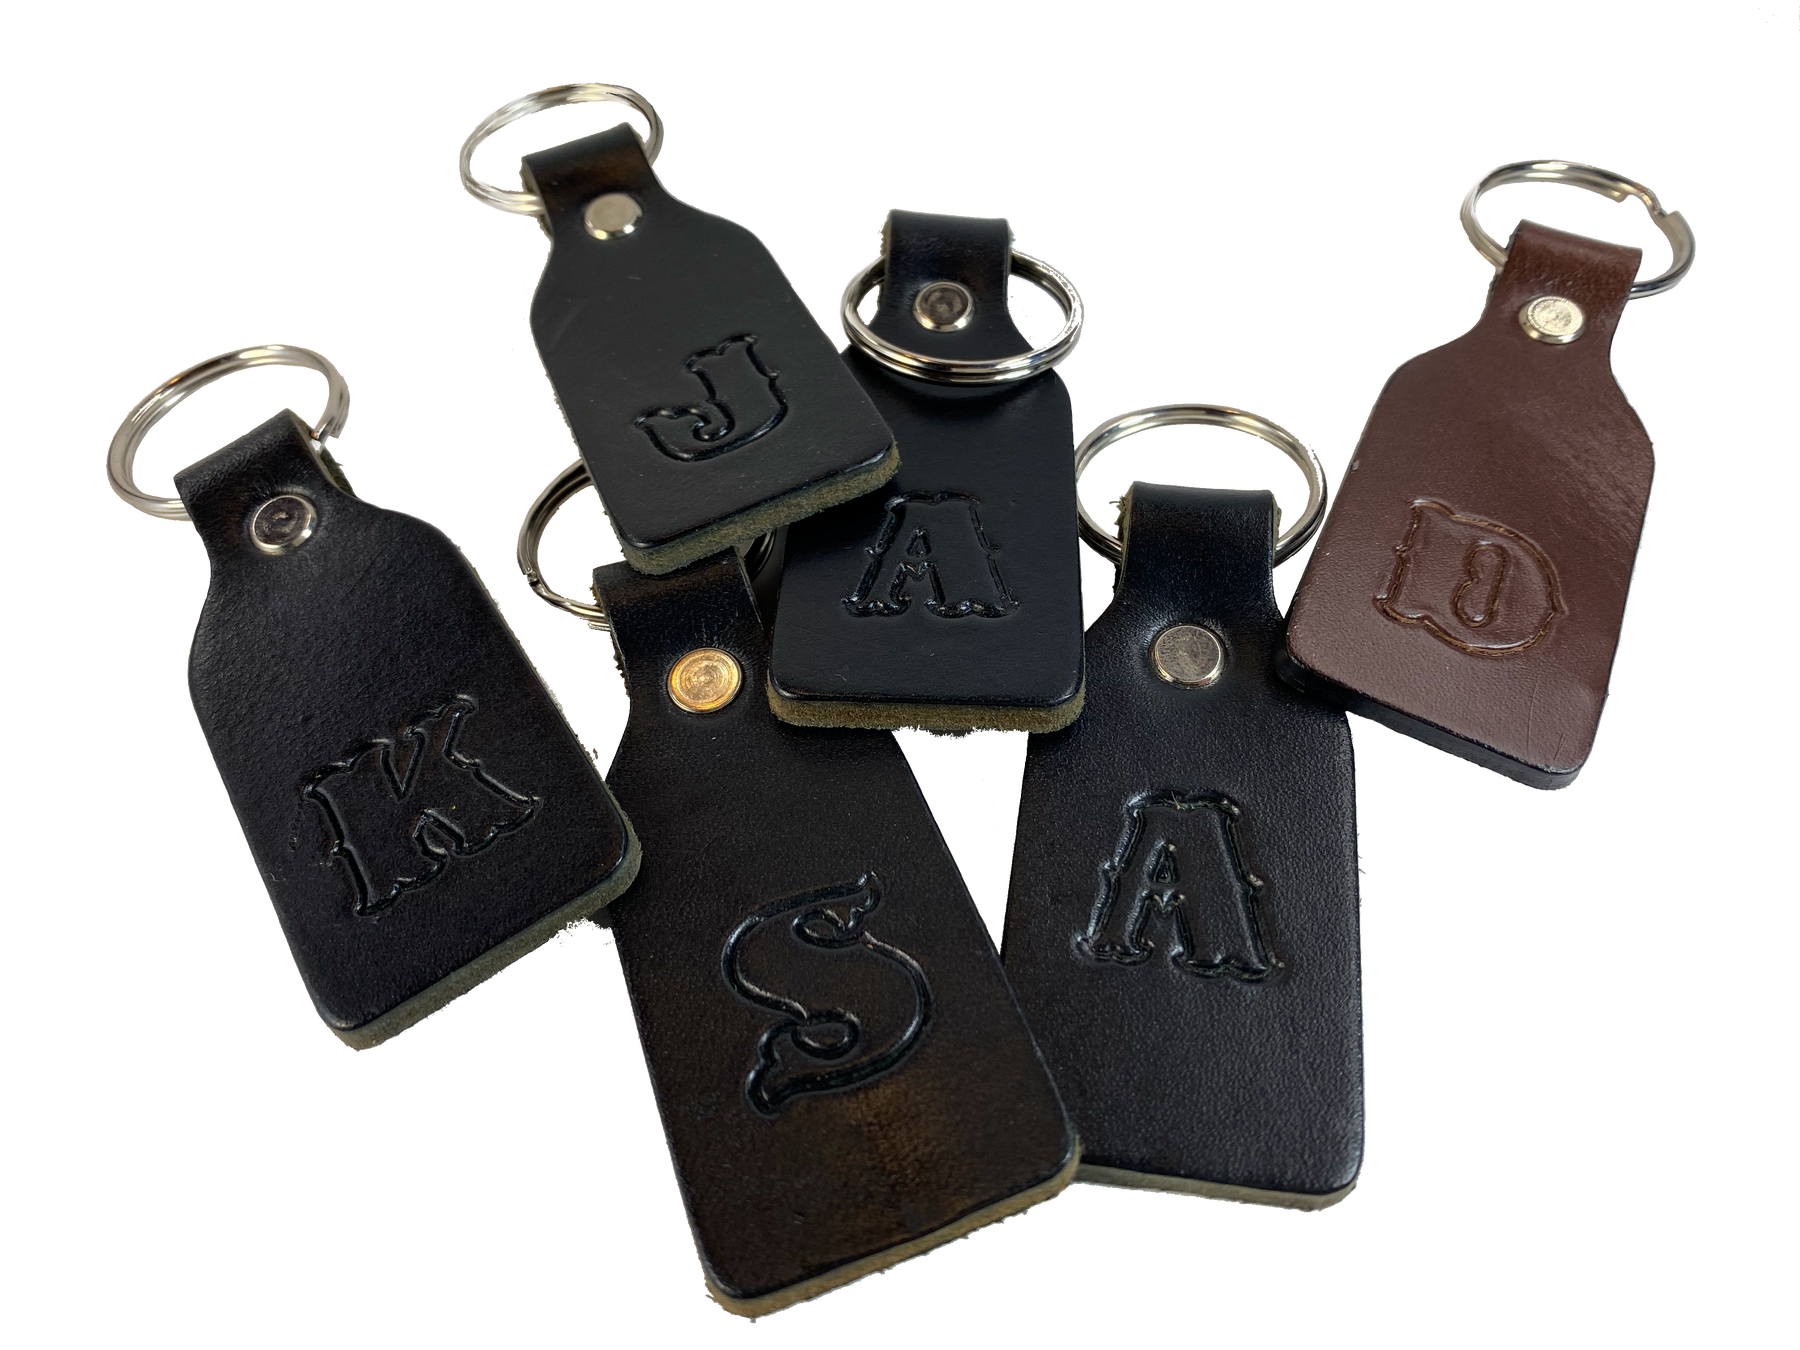 Buckle and Hide Leather Personalized Initial Keychain Black / 3 Pack